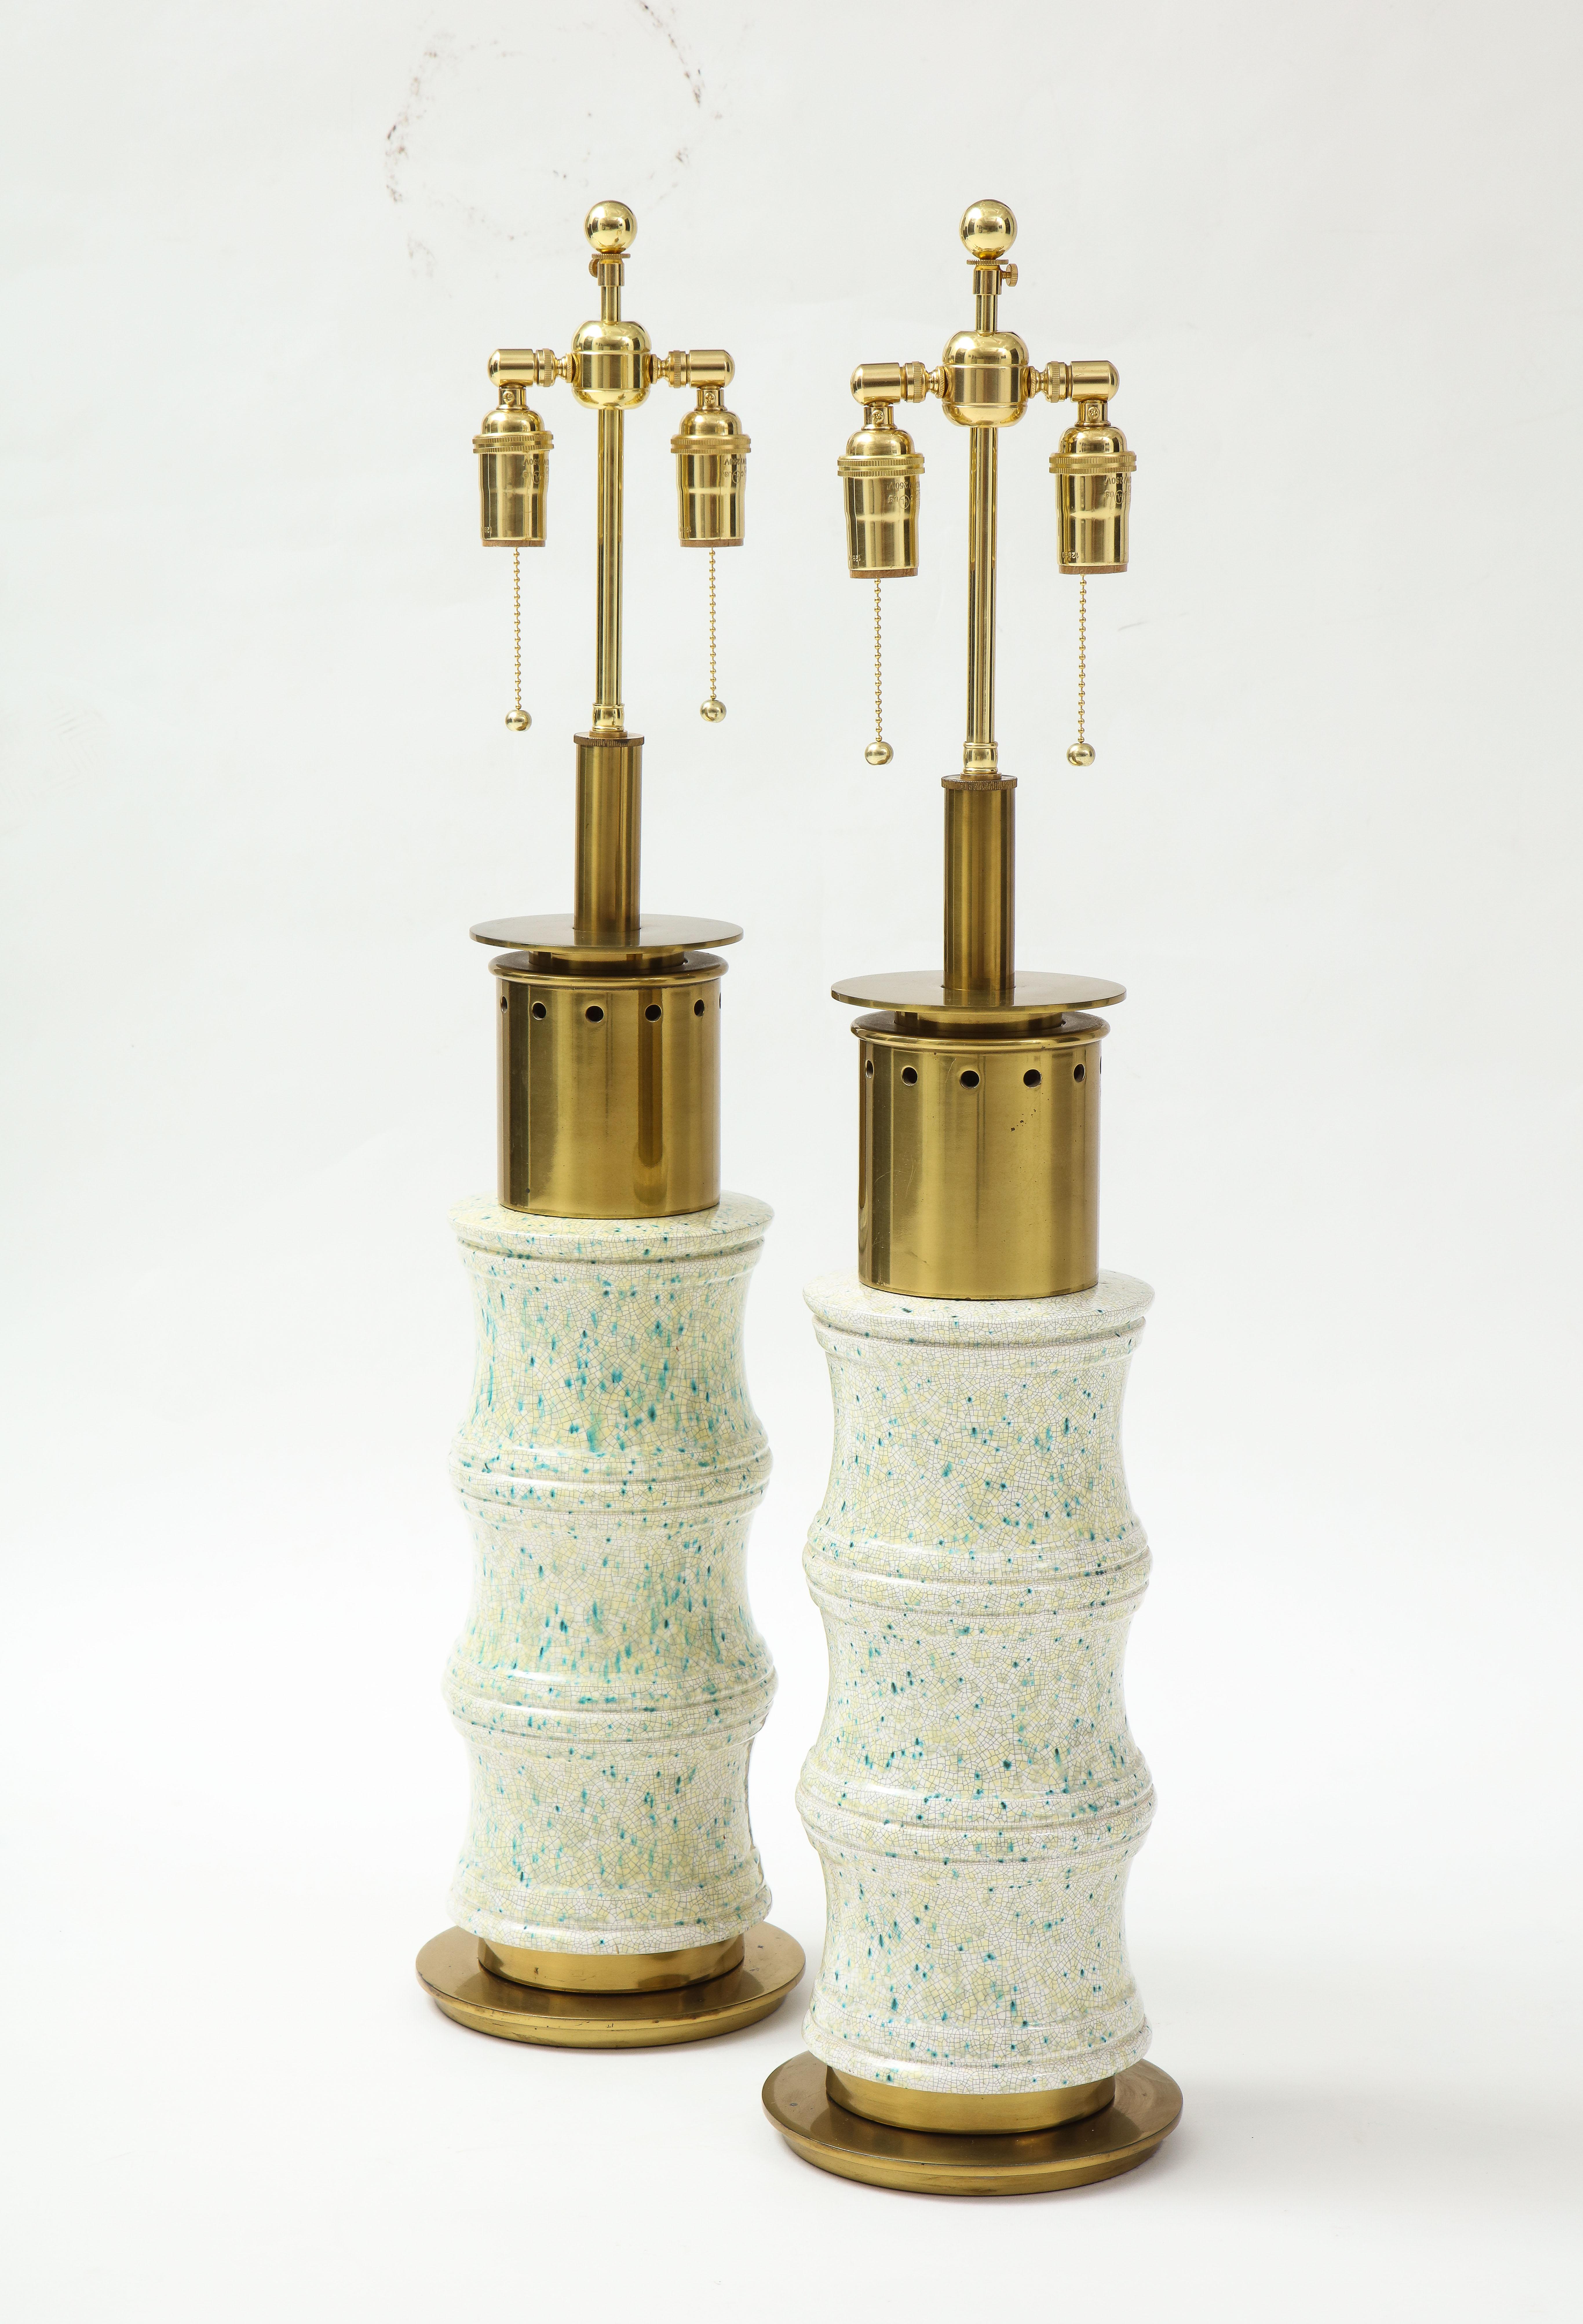 Pair of Large ceramic lamps by Stiffel lamp company.
The ceramic lamp bodies have a paint splattered crackled glaze finish.
The lamps have brass hardware with a beautiful patina and they have been Newly rewired with adjustable brass double clusters